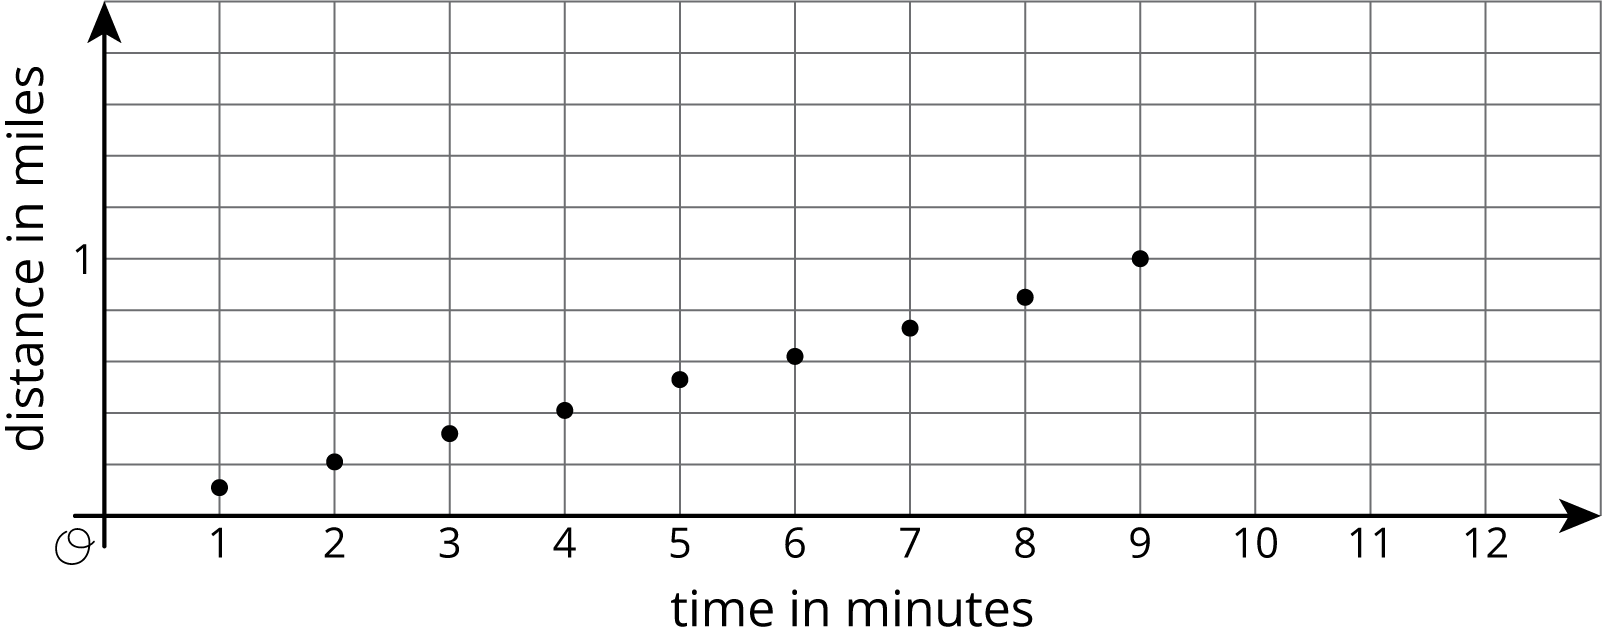 A scatterplot in a coordinate plane with the origin labeled “O.” The horizontal axis is labeled “time in minutes” and the numbers 1 through 12 are indicated. The vertical axis is labeled “distance in miles,” and the number 1 is indicated. The graph shows the trend of the data points moving approximately linearly upward and to the right.  The coordinates of the points are as follows: 1 comma 0 point 11, 2 comma 0 point 2 1, 3 comma 0 point 3 2, 4 comma 0 point 4 1, 5 comma 0 point 5 3, 6 comma 0 point 6 2, 7 comma 0 point 7 3, 8 comma 0 point 8 5, 9 comma 1.